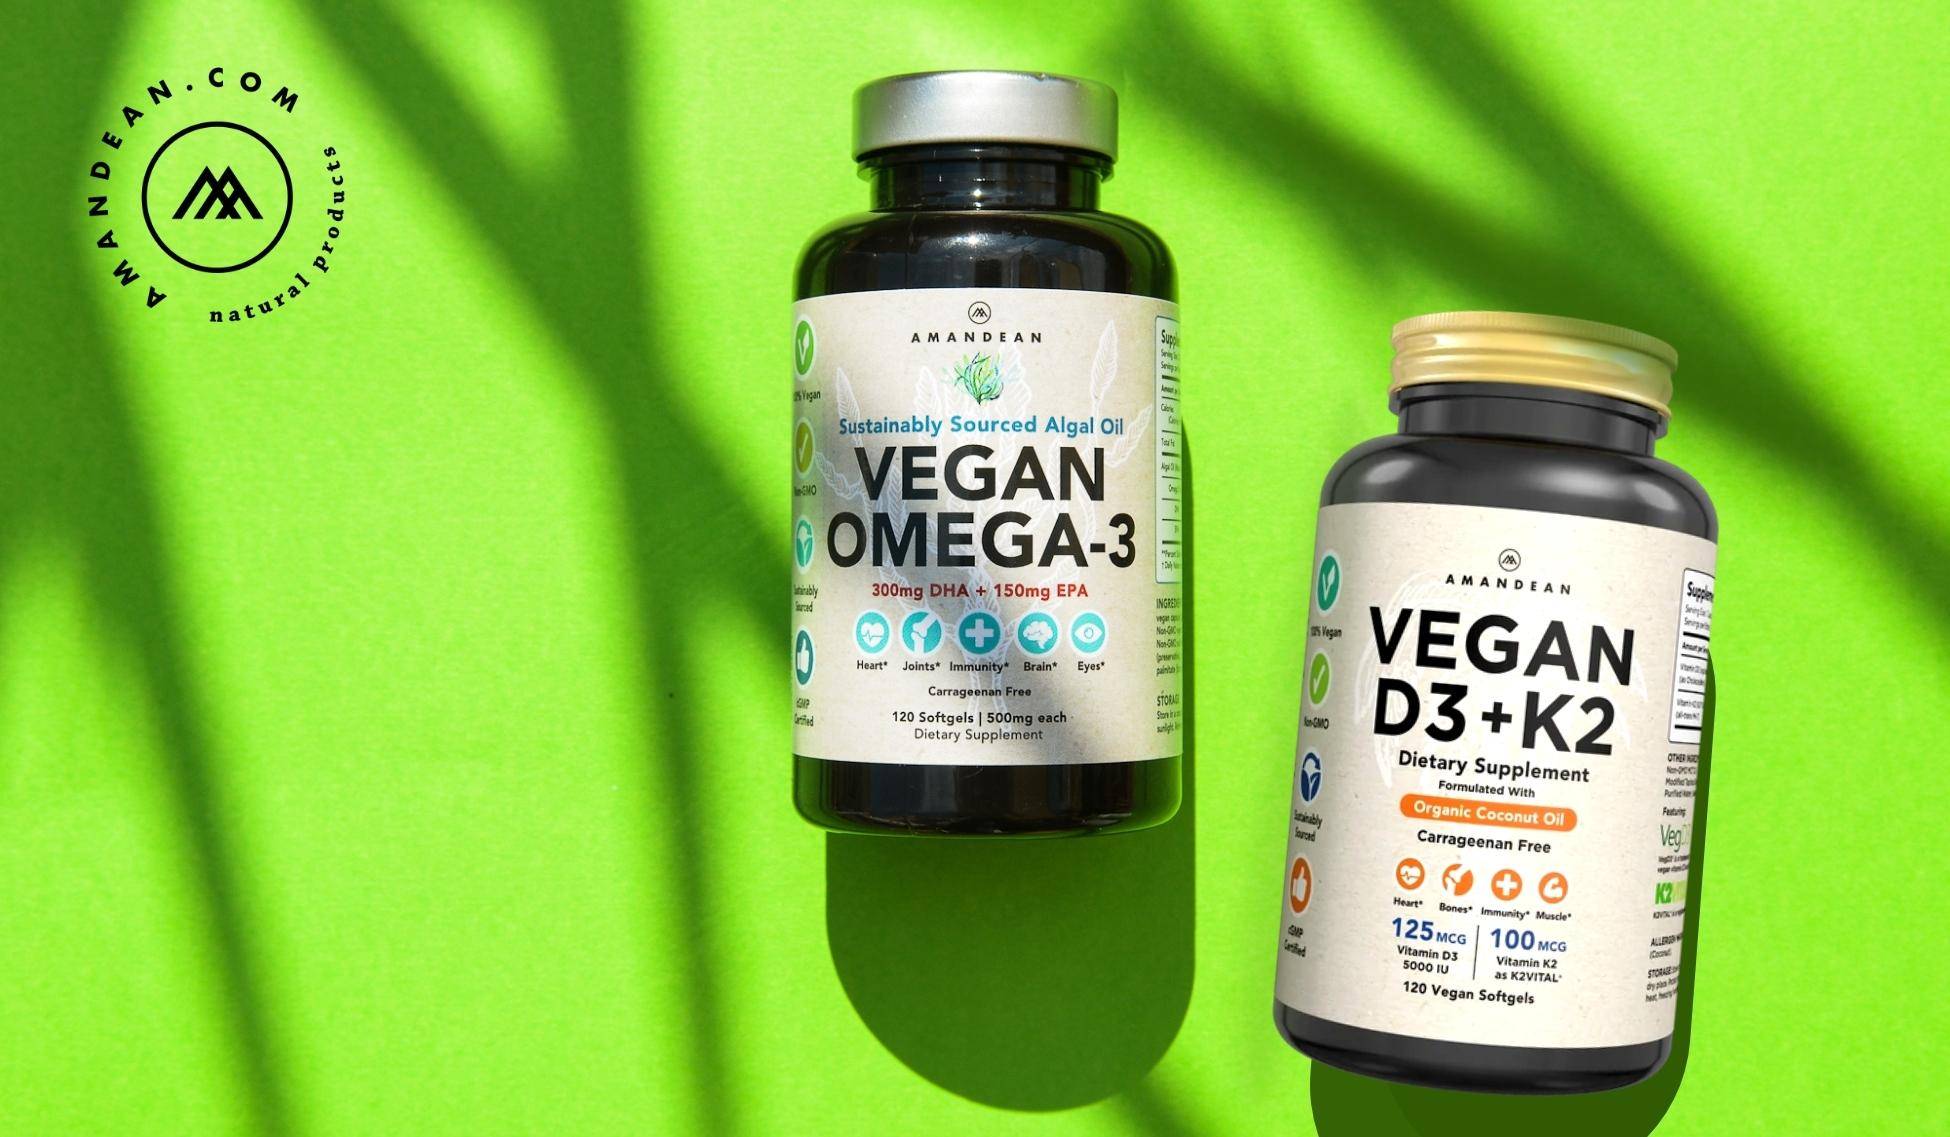 Why Take Vegan Omega-3 With Vitamin D3 and K2?